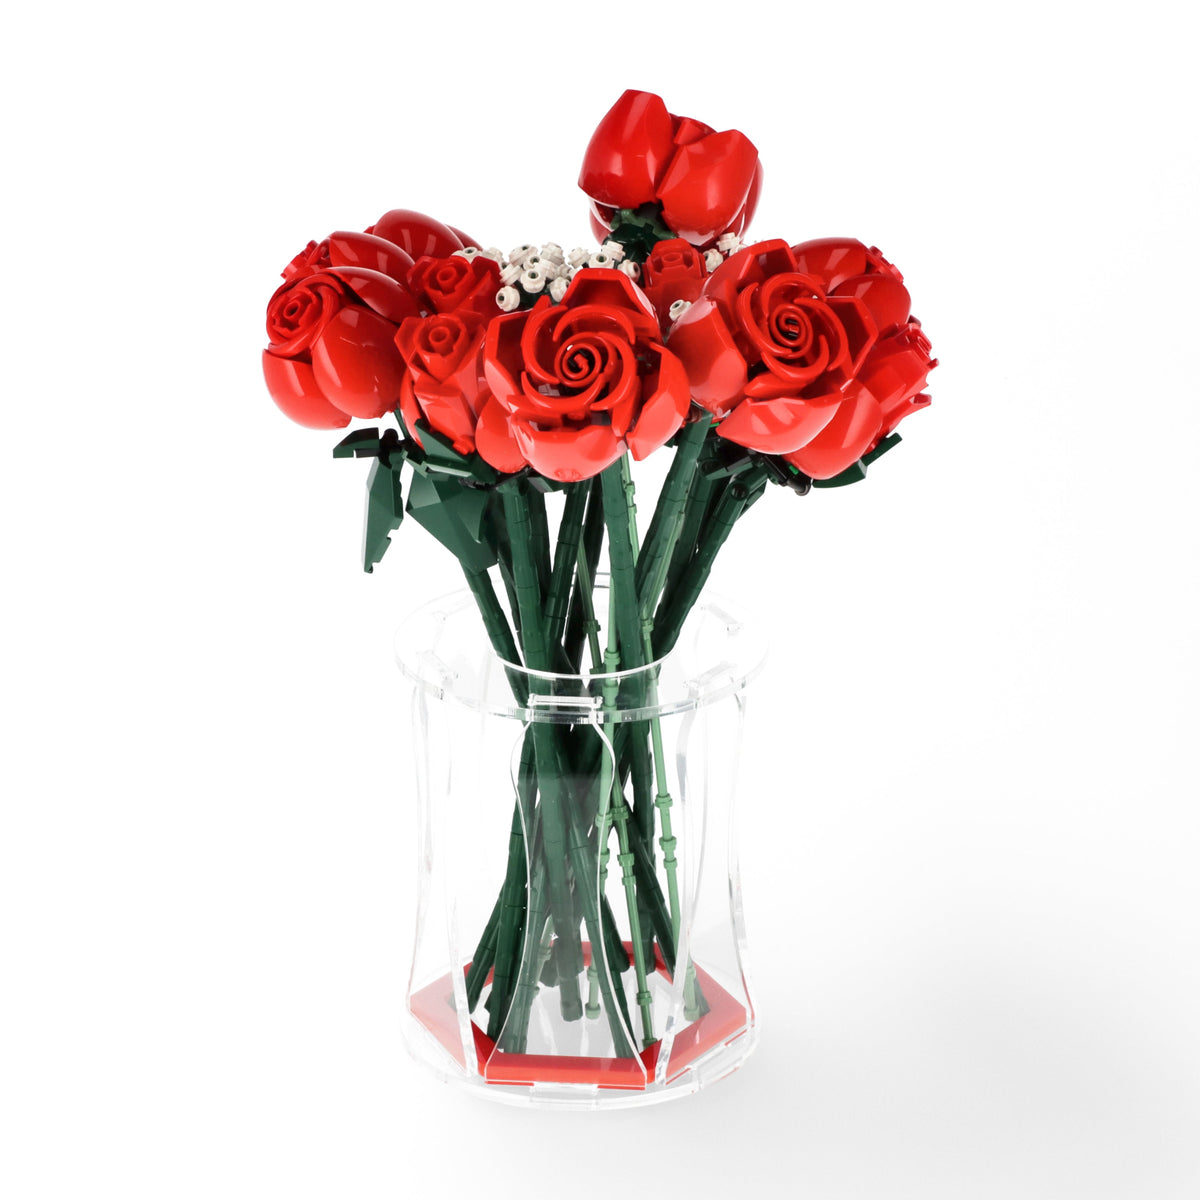 Display Vase For LEGO 10328 Bouquet of Roses